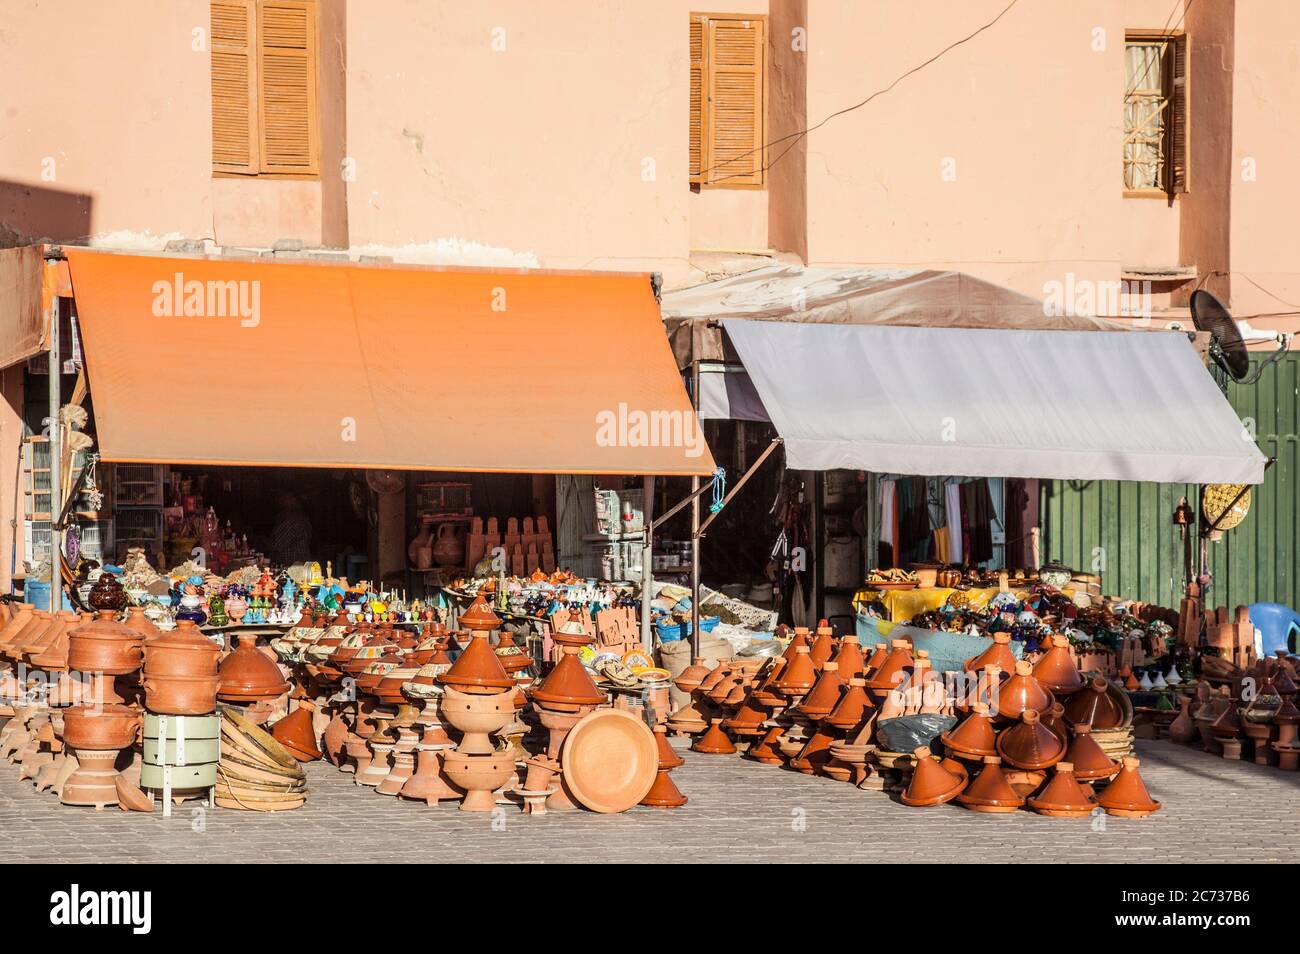 Pottery shop in central Ourzazate, south-central Morocco, selling earthenware goods such as tagines, jugs, pots and casseroles. Stock Photo